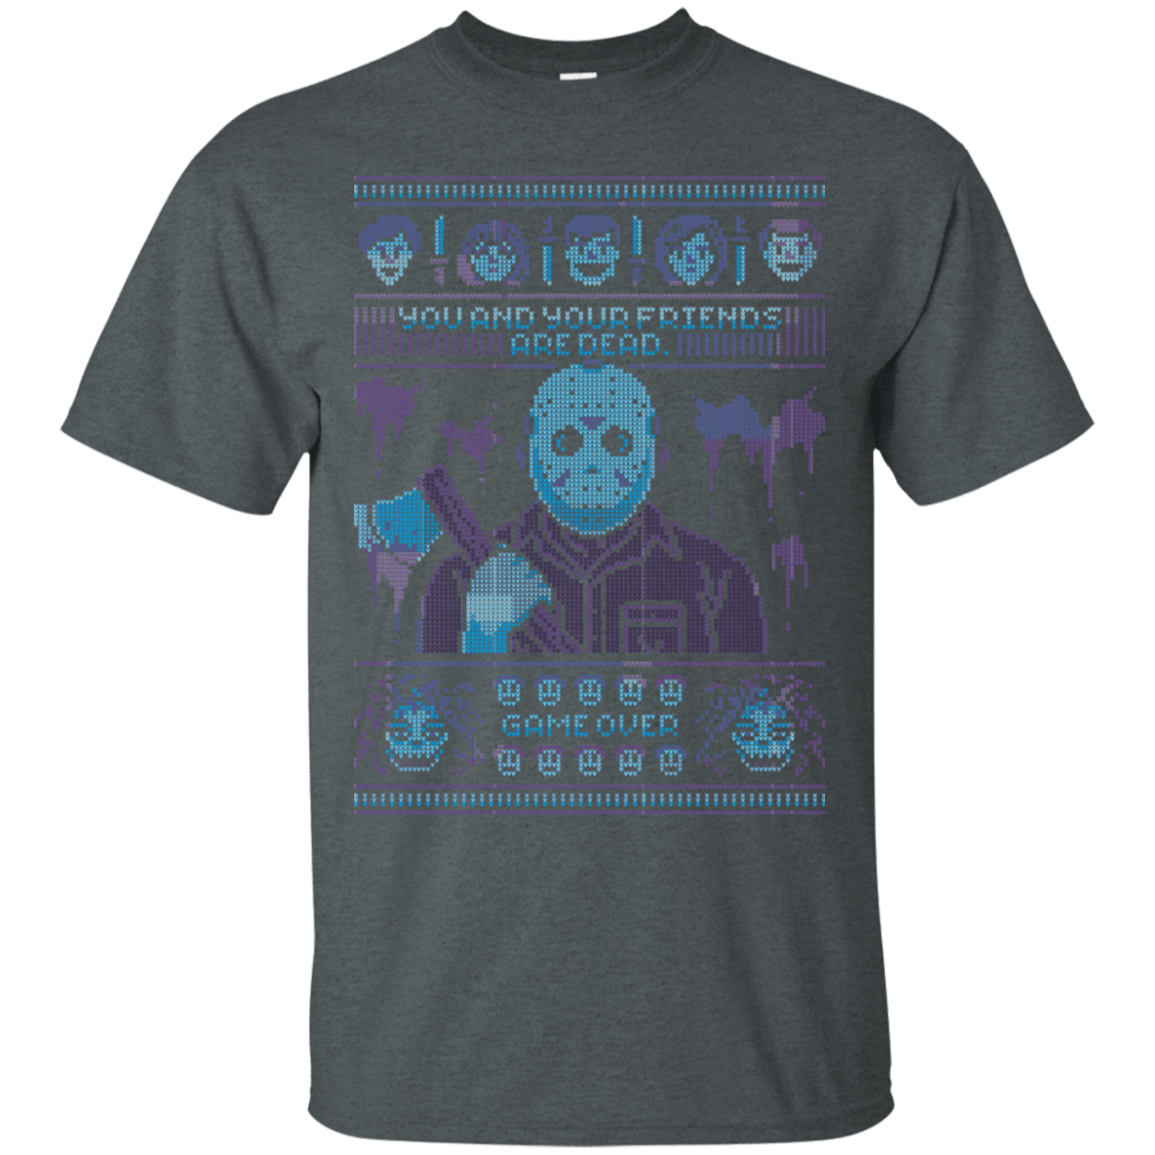 T-Shirts Dark Heather / S Game Over Ugly Sweater T-Shirt